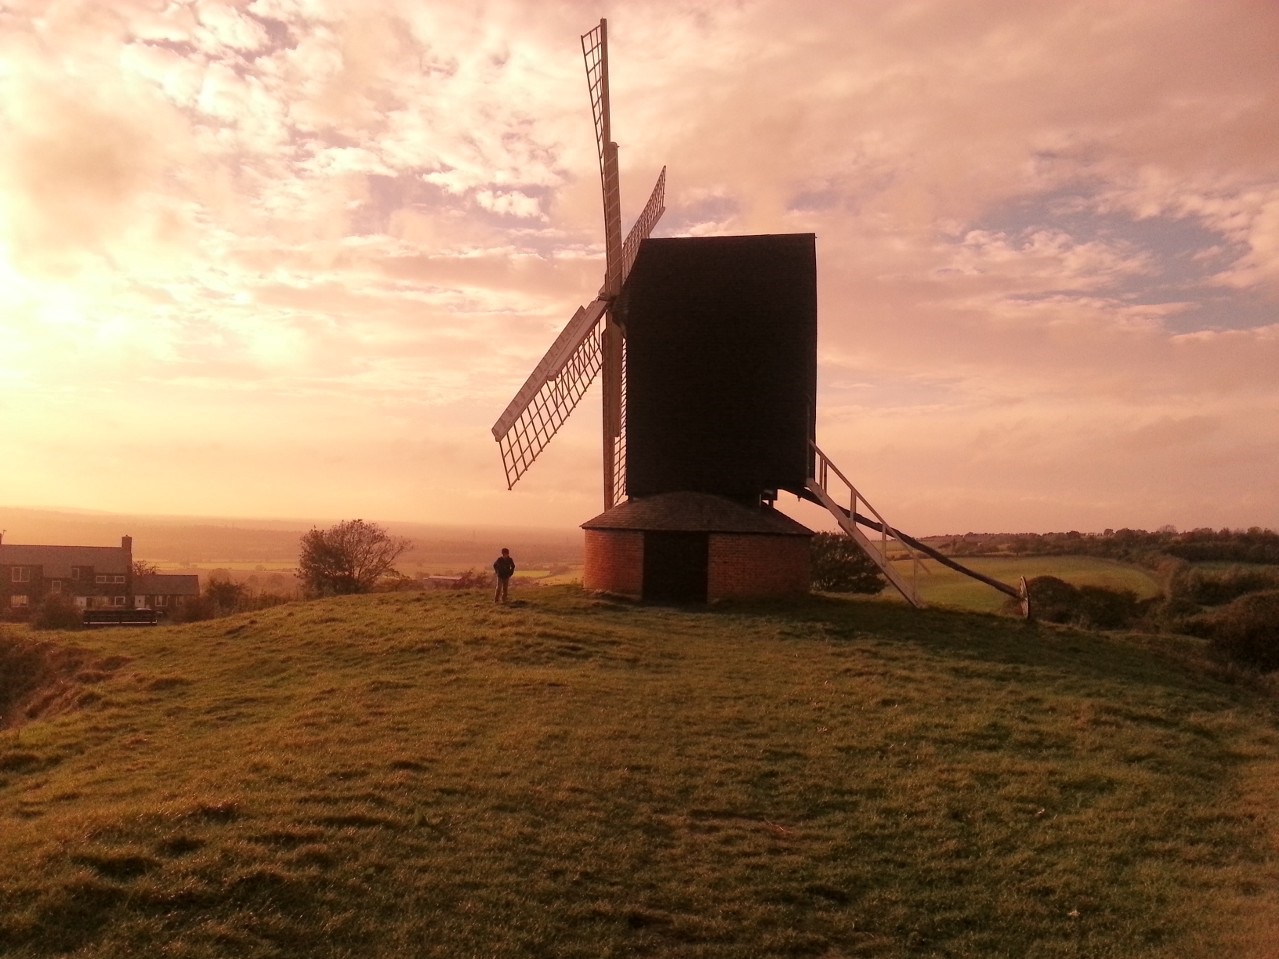 Another real location, this is the windmill in Brill, near Oxford in England. (Known as Brae Hill in Oculus). Brill was Tolkein’s inspiration for Bree. Photo by Aitor Ibarra.